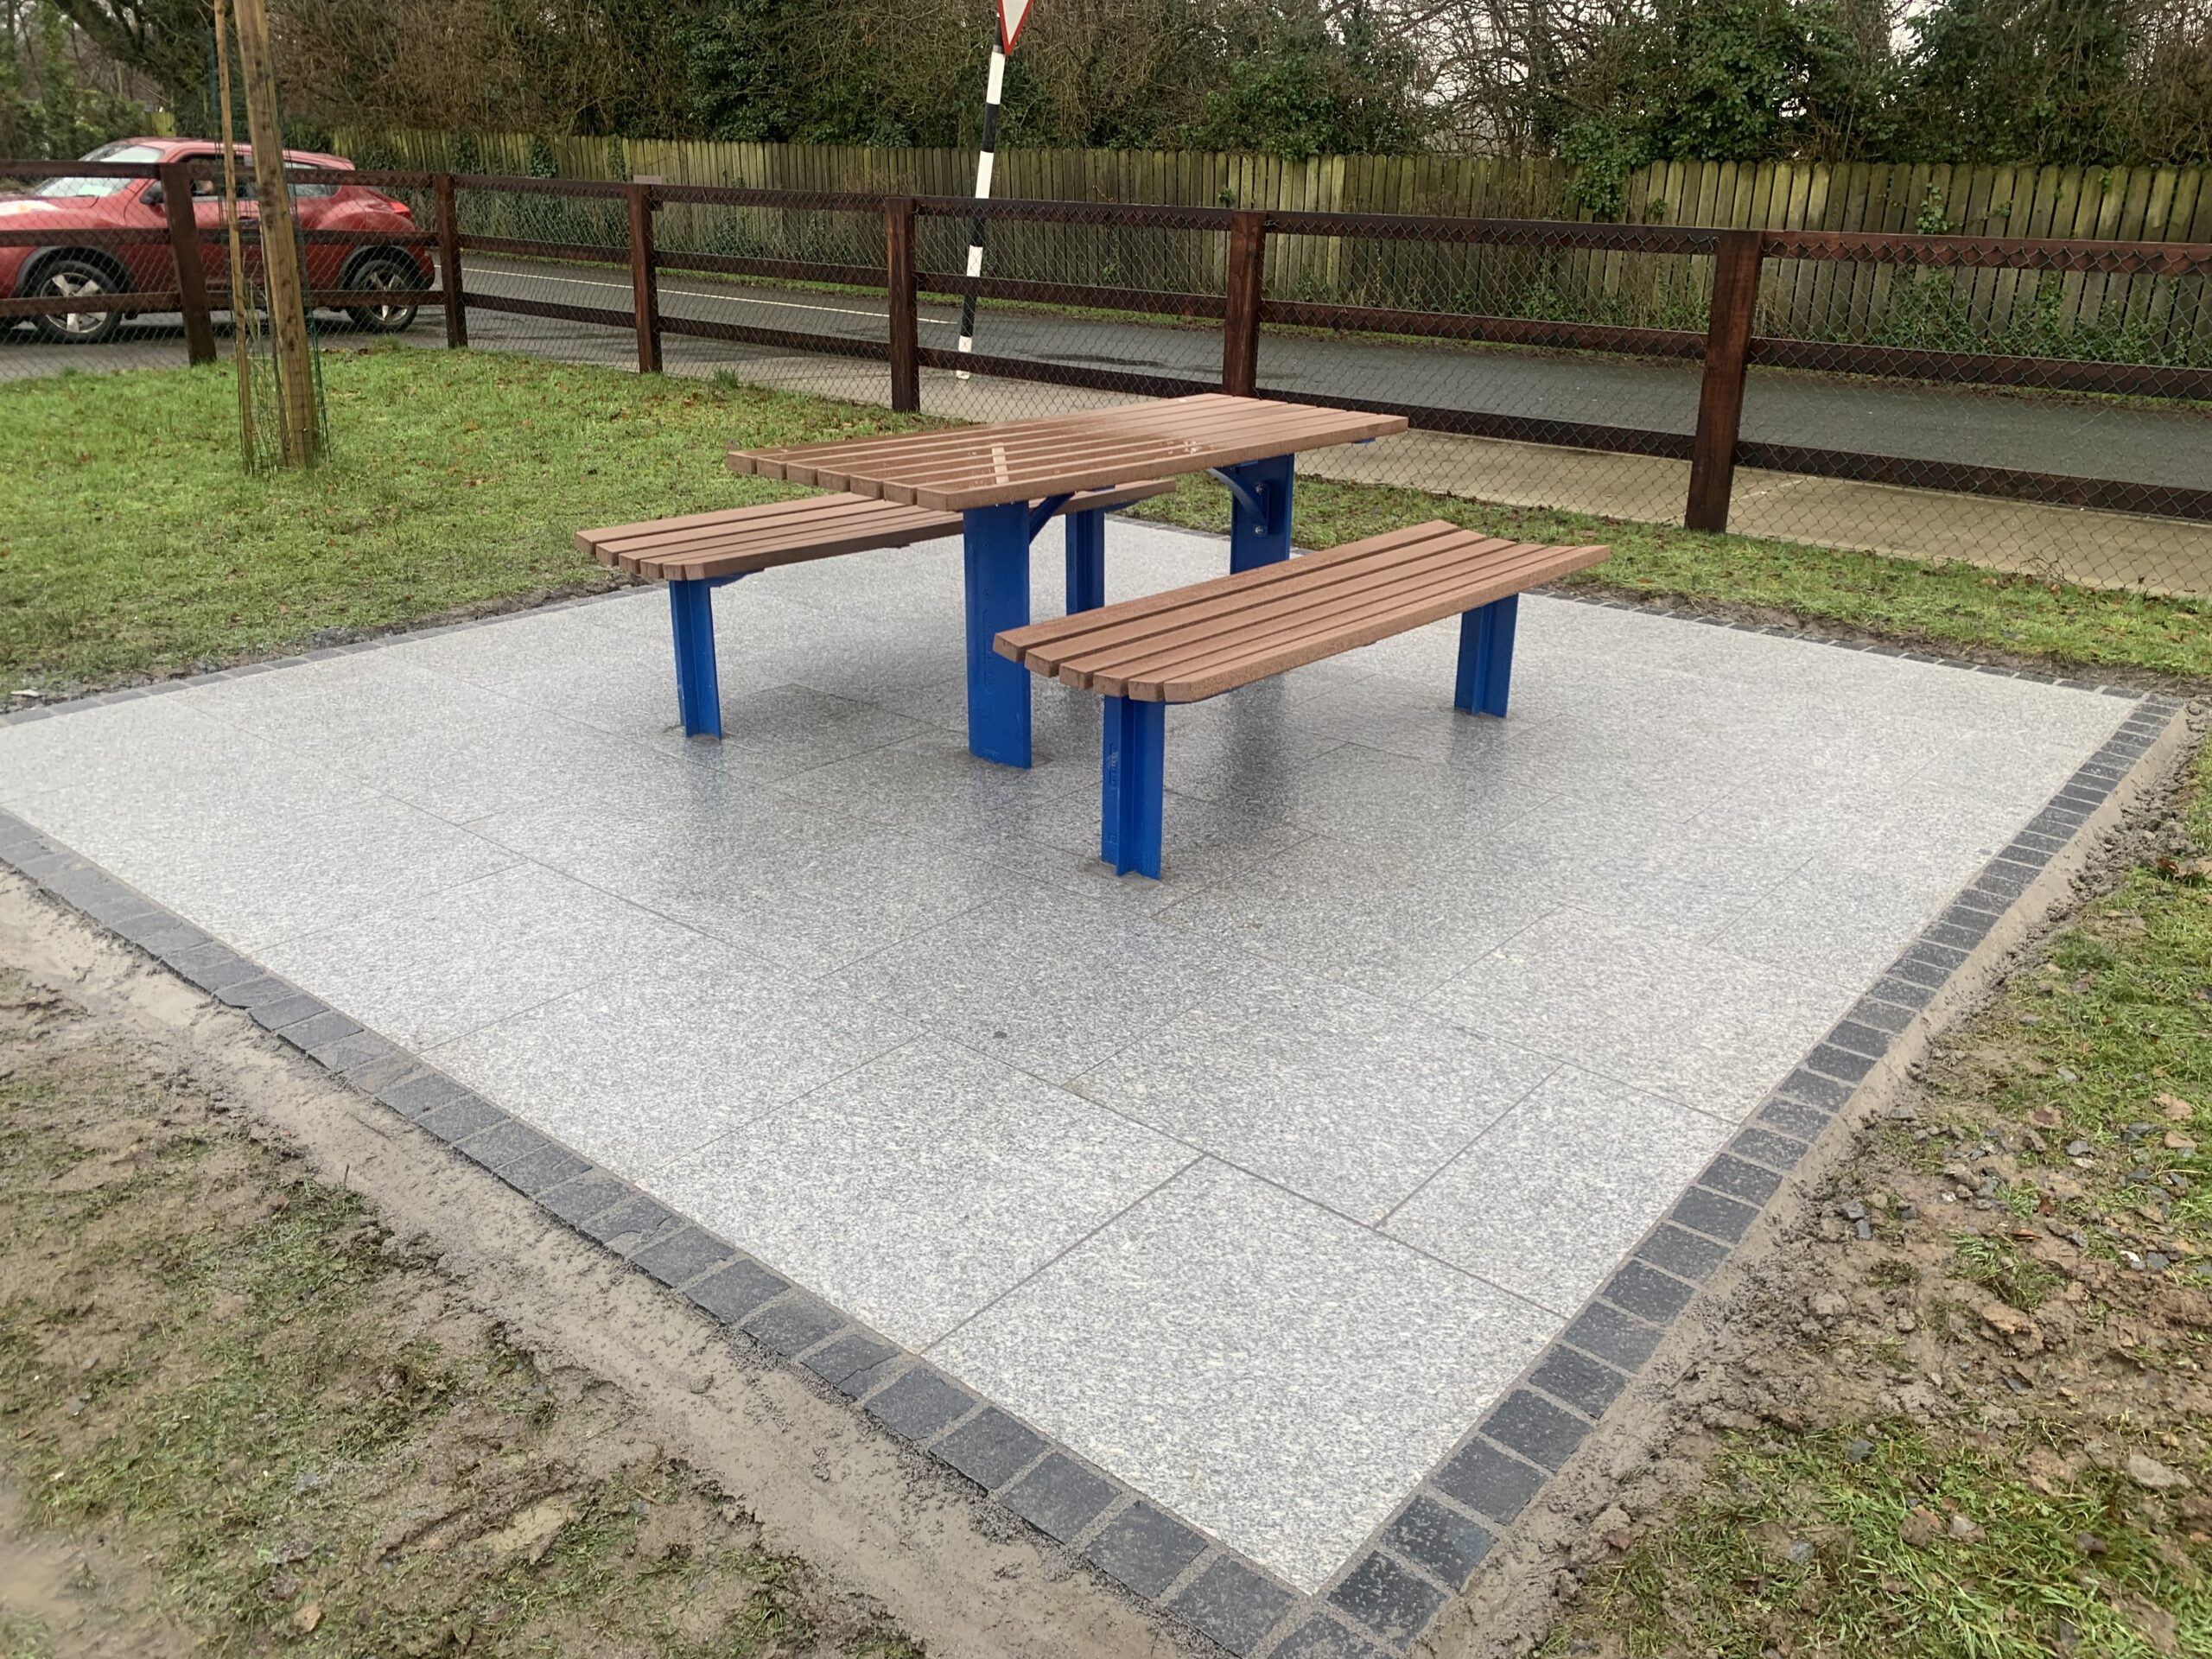 Third Picnic Bench Installed…which is also accessible…Shout out to Colin Franklin of Concraft Construction…great job